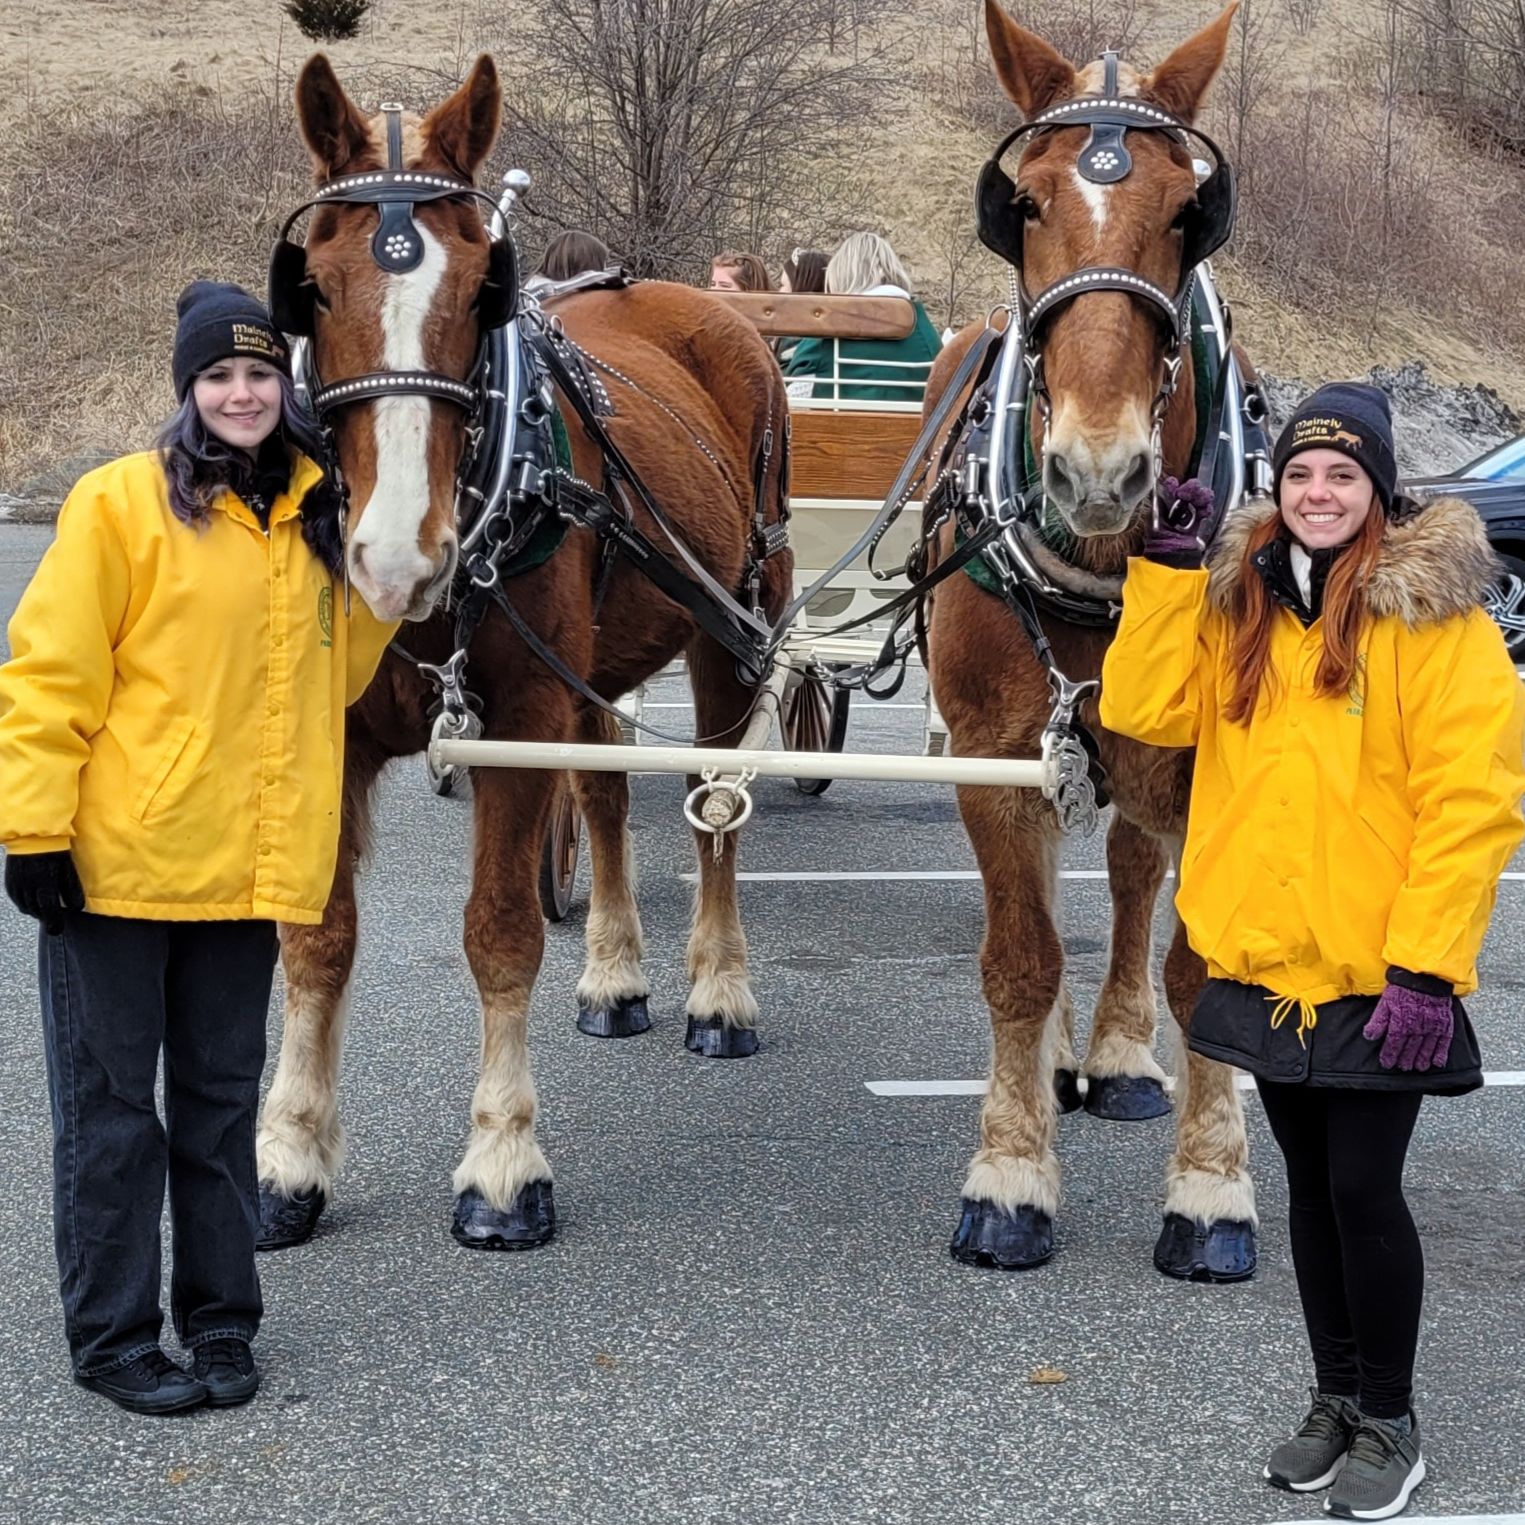 Birthday Carriage Rides in Ludlow, Massachusetts